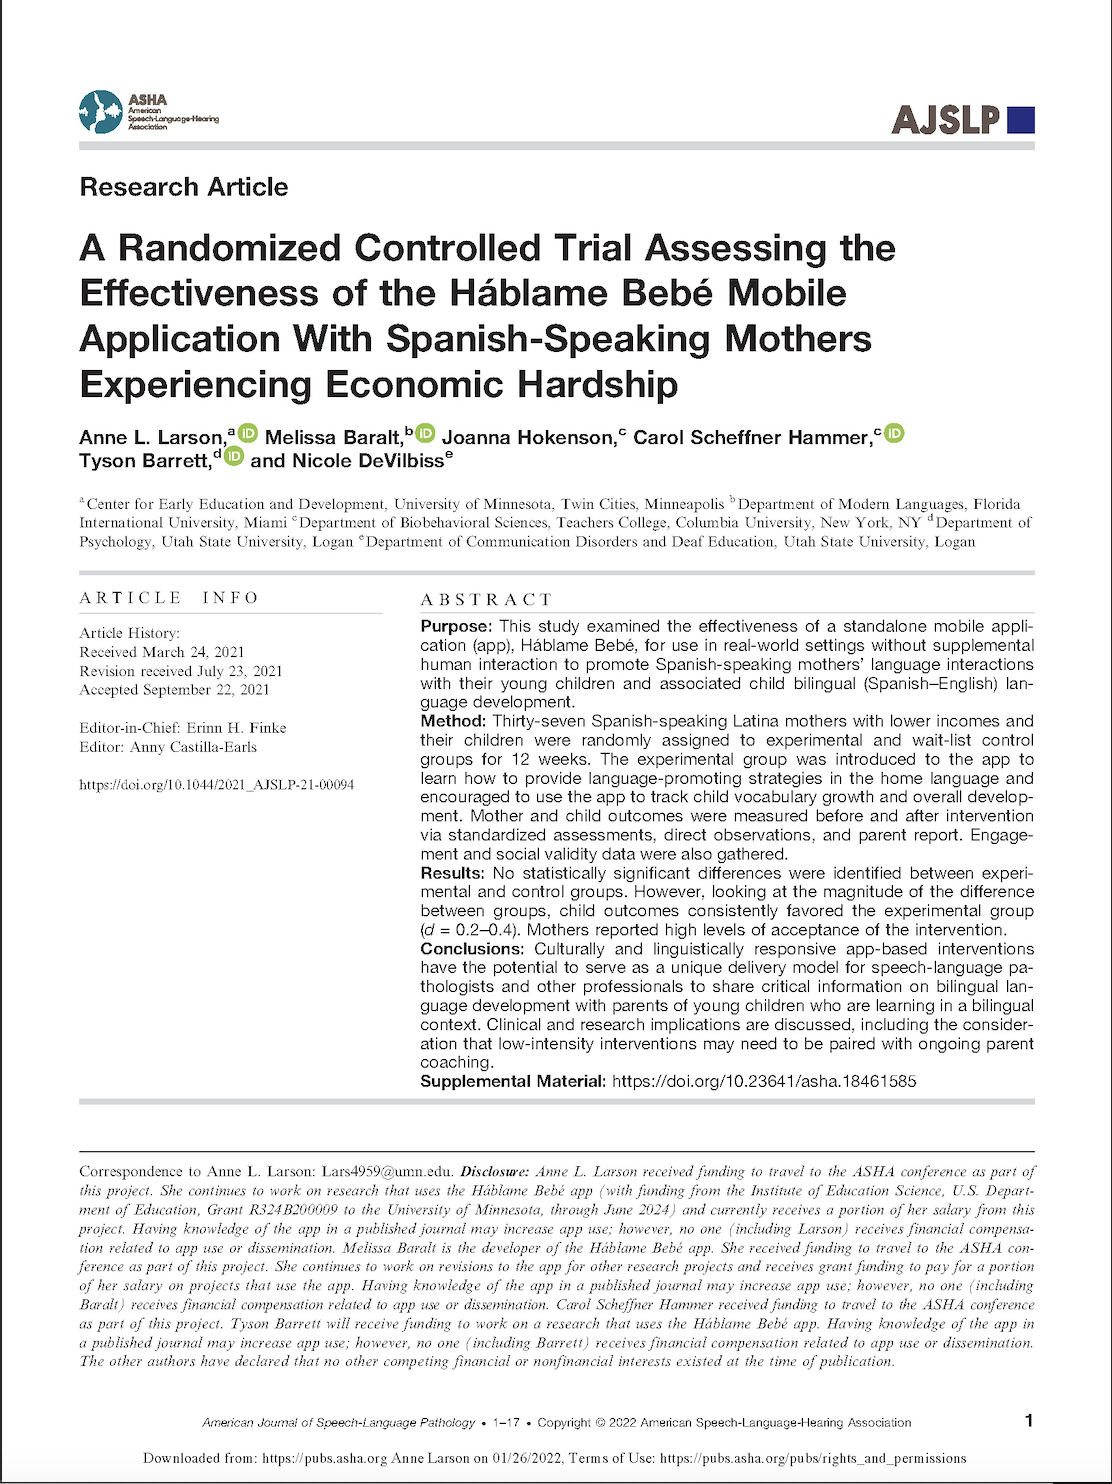 This is an image of the first page of a research article, select the link below to access the entire article. Larson, Baralt, Scheffner Hammer, Barrett, & DeVilbiss.2022.A Randomized Controlled Trial Assessing the Effectiveness of the Háblame Bebé Mobile Application With Spanish-Speaking Mothers Experiencing Economic Hardship